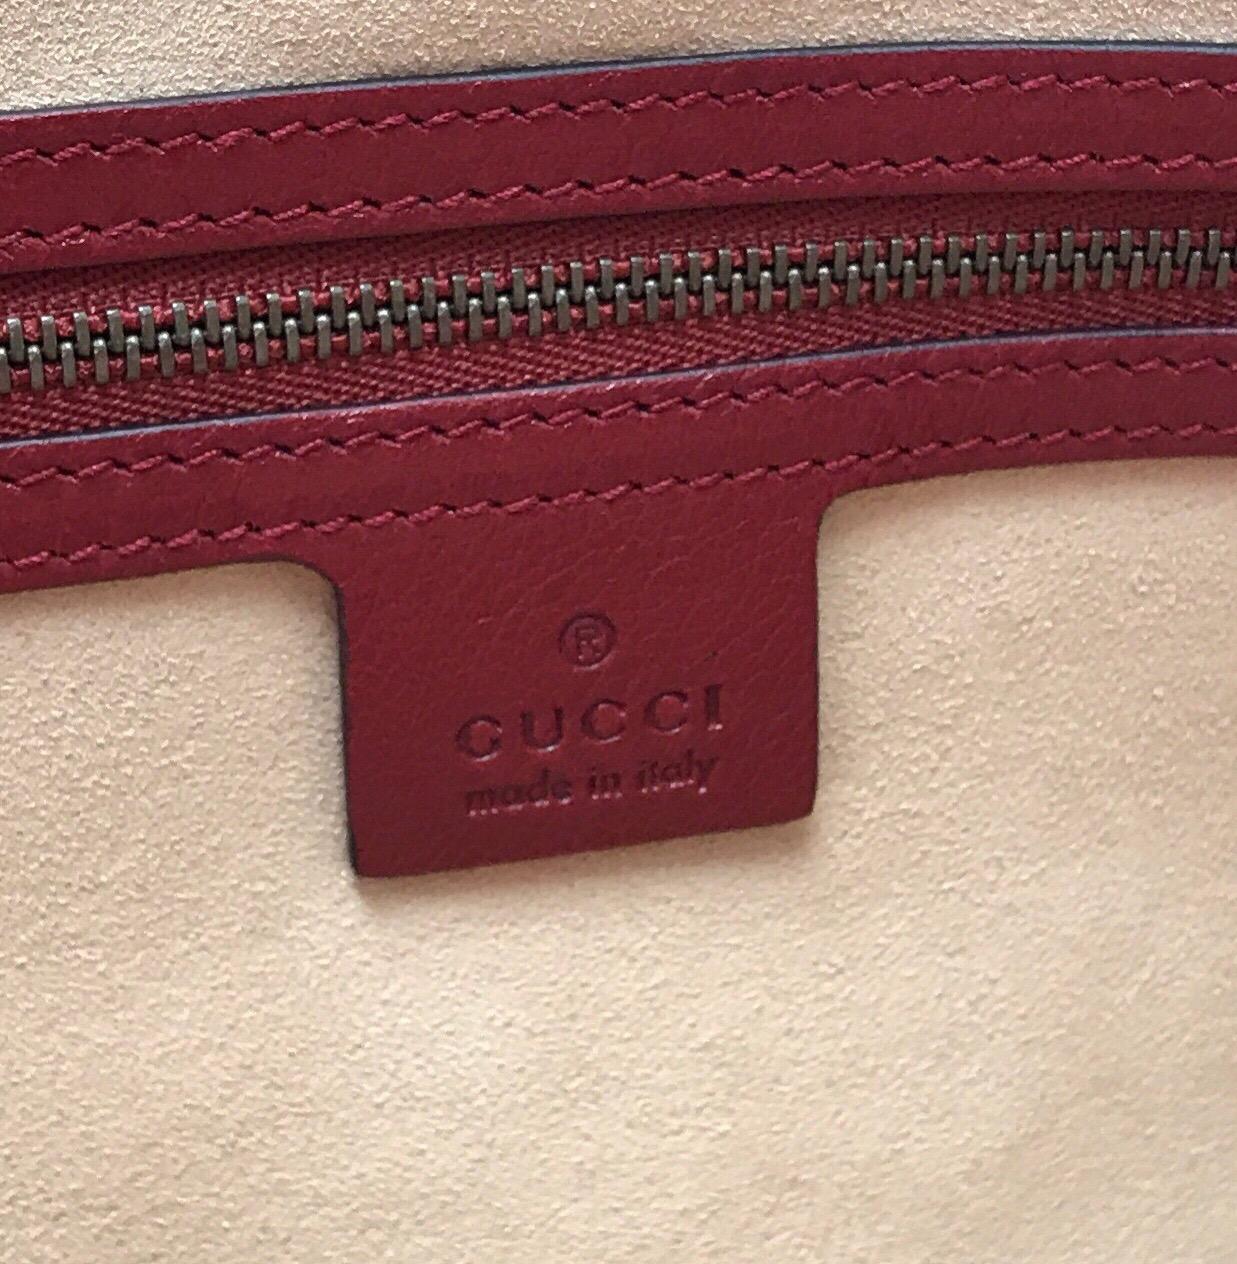 Gucci Red Marmont Re(Belle) Handbag For Sale 1